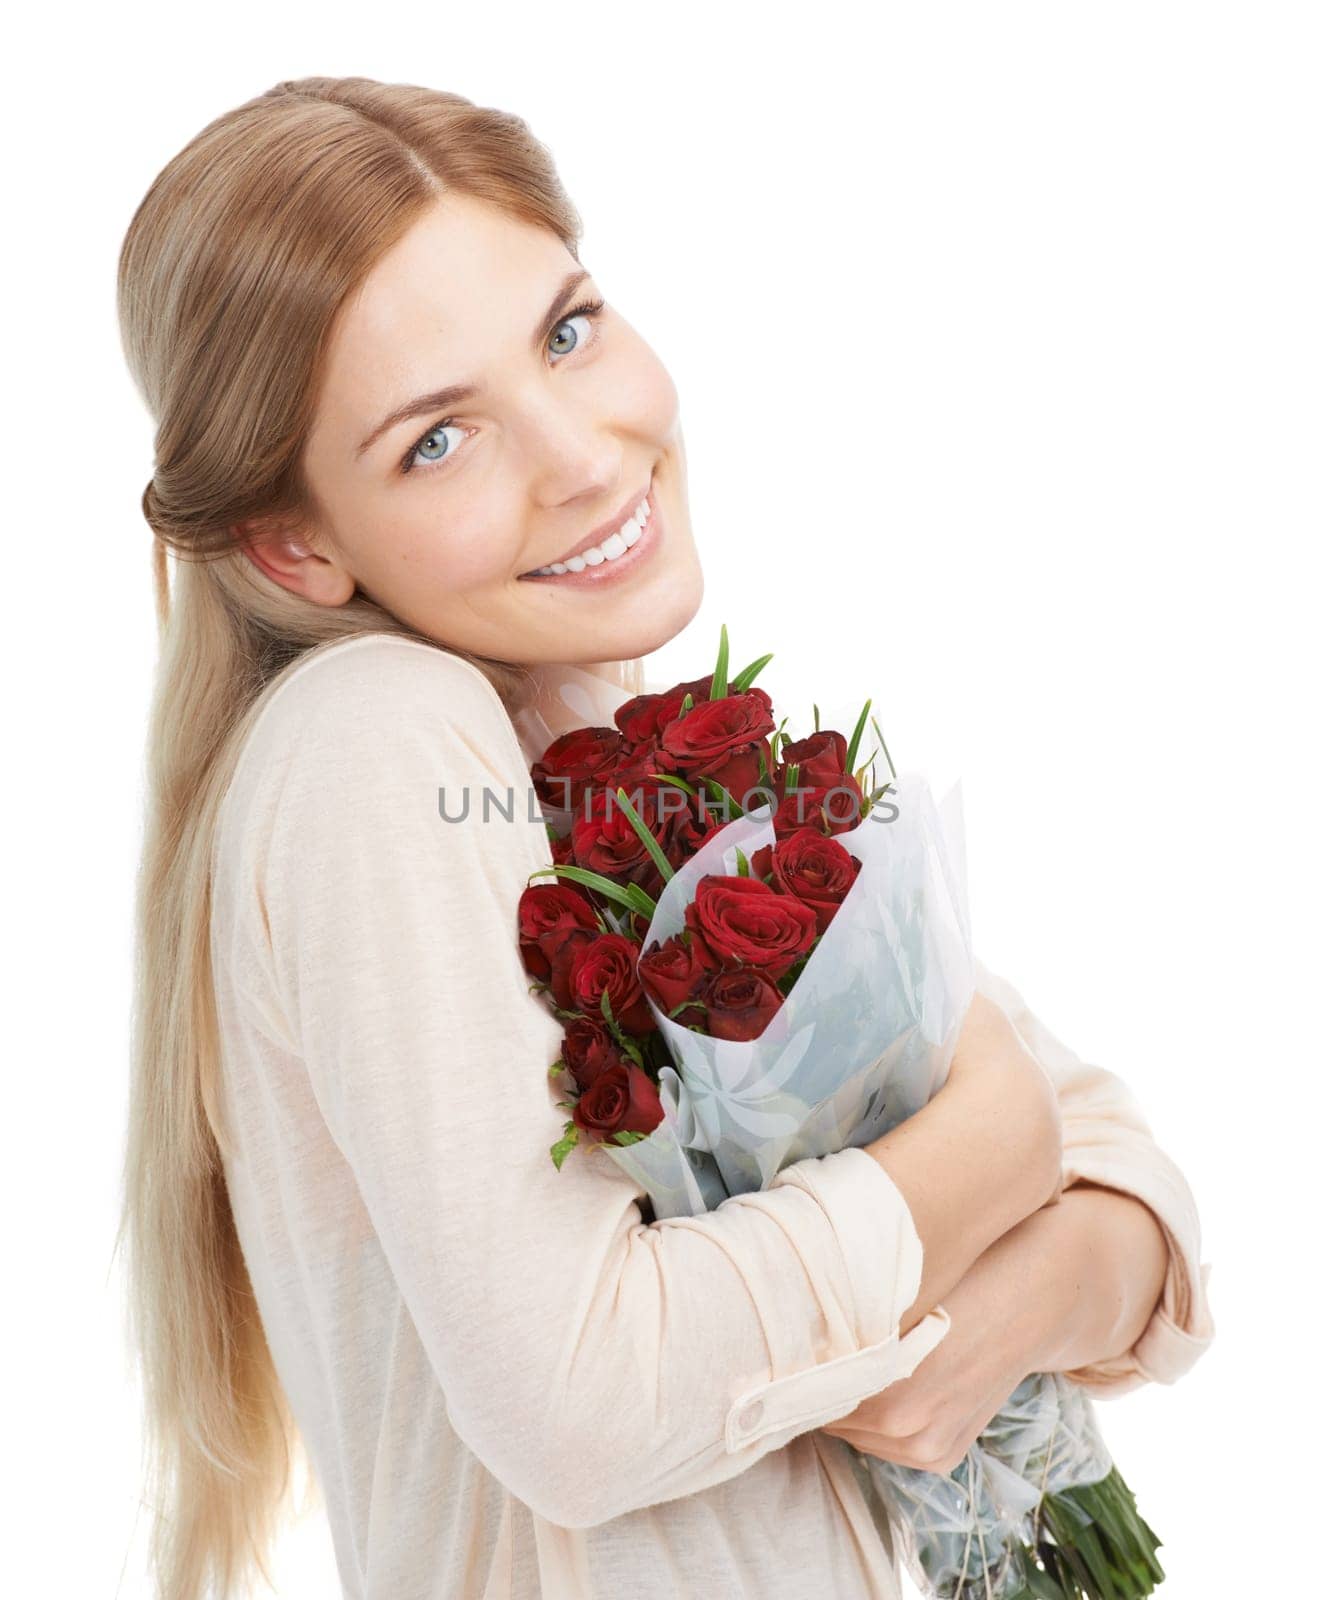 Woman hug roses, smile in portrait with gift for Valentines day, love and nature isolated on white background. Happiness, romance and female with red bouquet, holiday celebration and happy in studio.